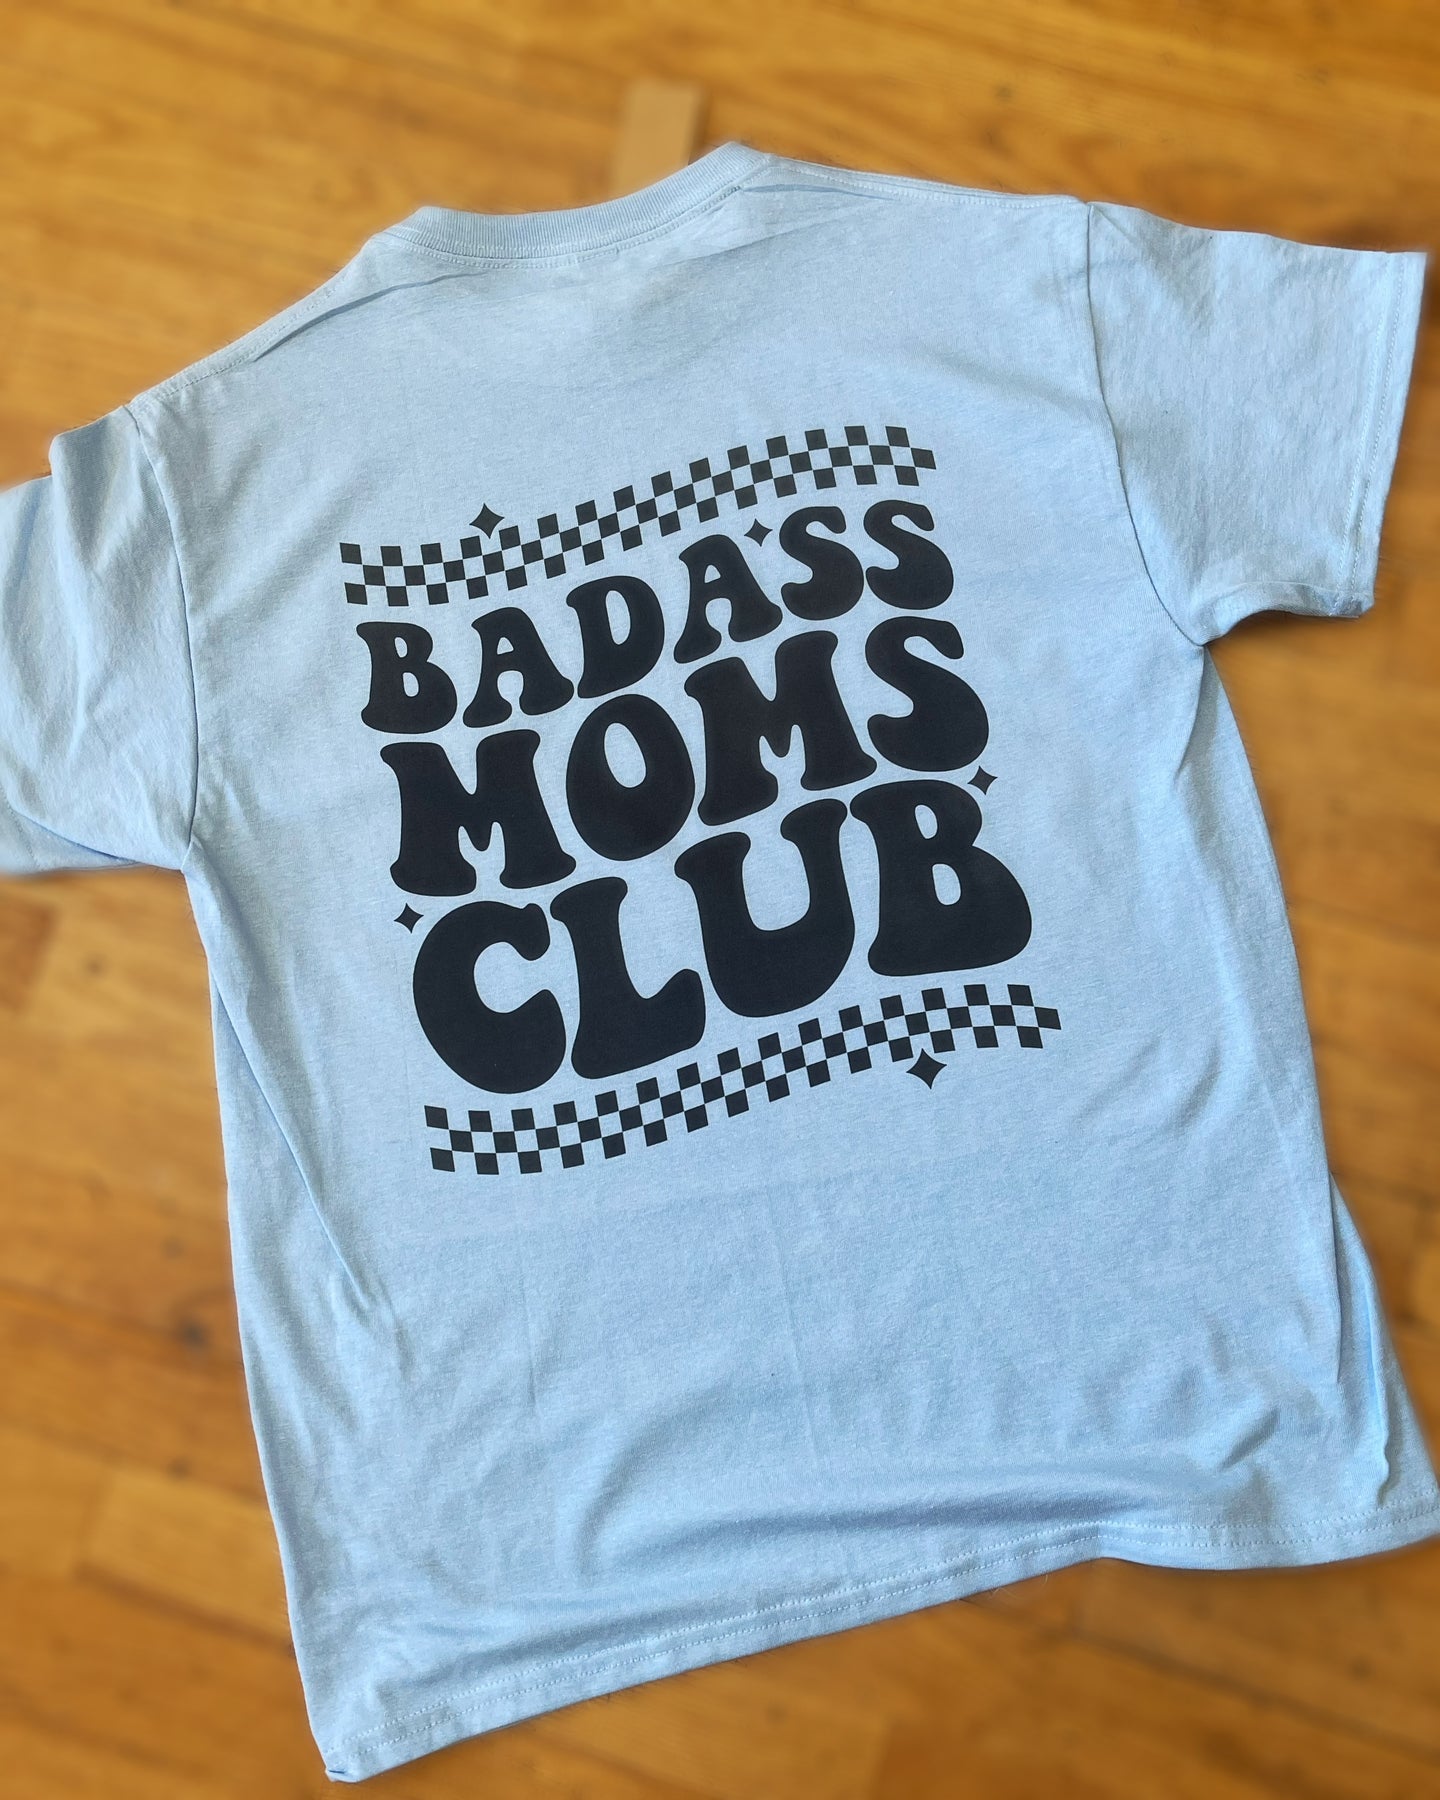 Bad Ass Moms Club Tee front & back